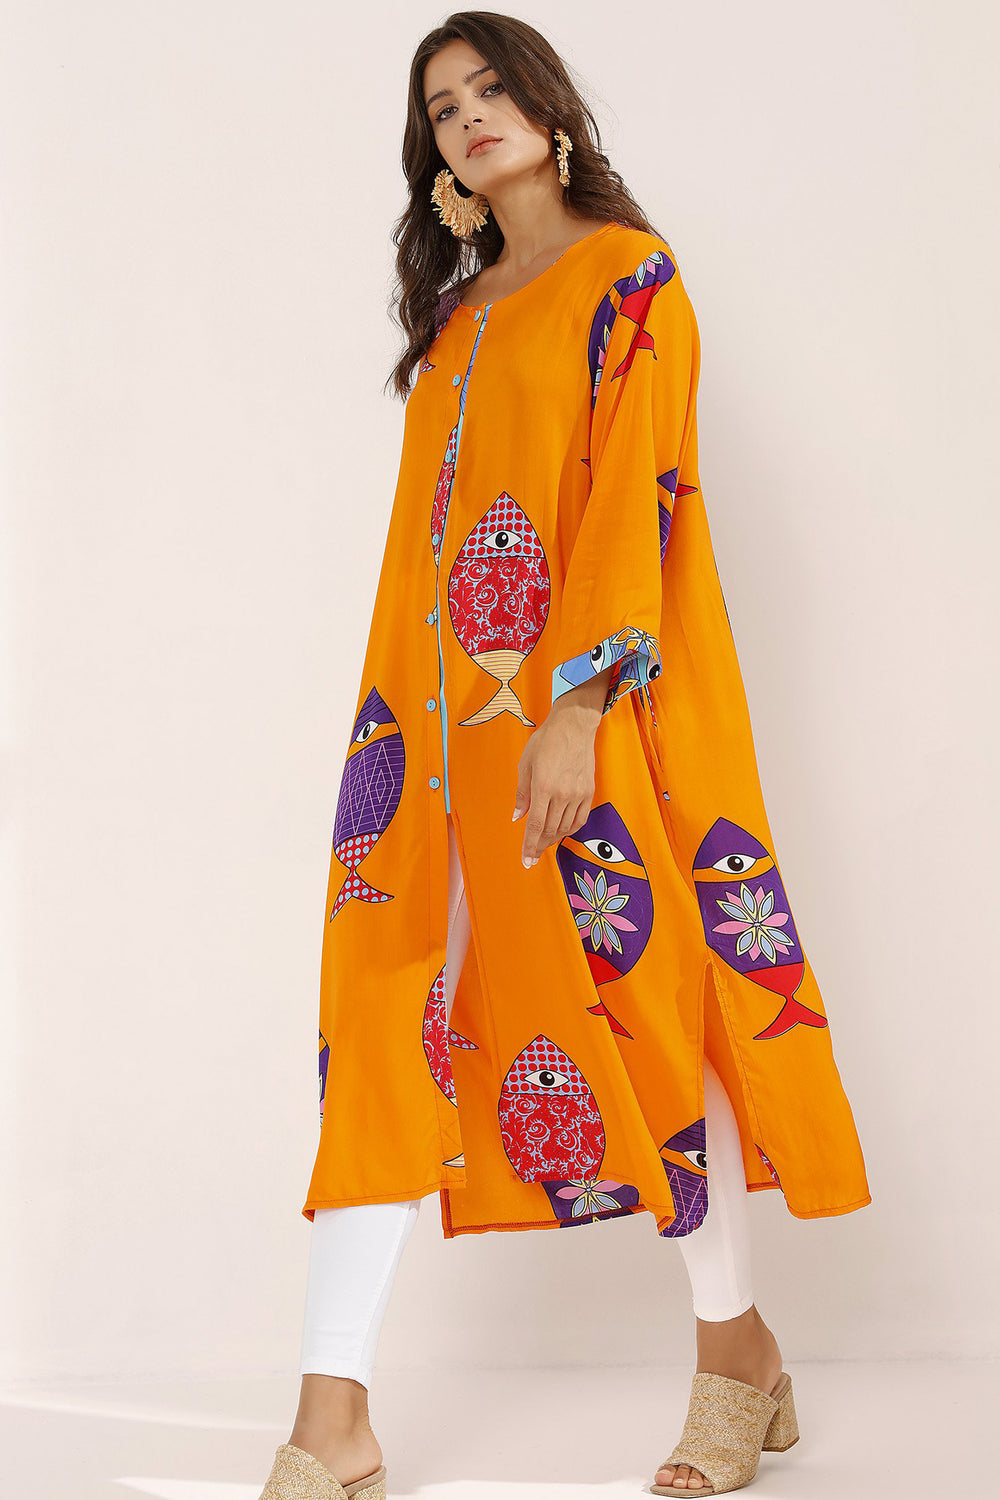 Store WF Orange Fish Print Viscose Tunic Modest Orange Long Top with Fish Prints, Long Sleeves and Front Buttons